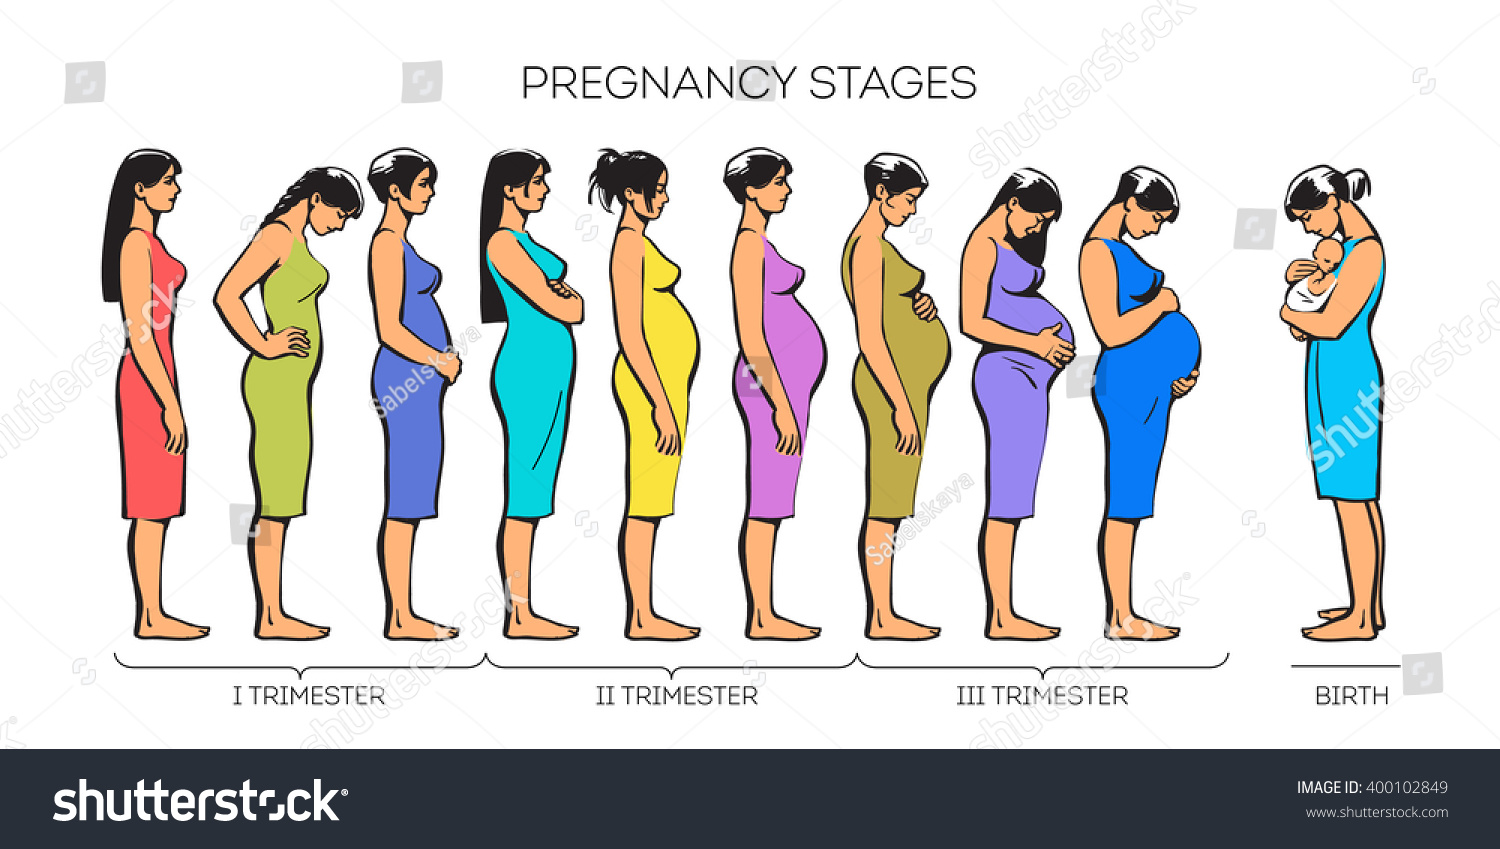 Stages Of Pregnancy Vector Image Of Stages Of Pregnancy Pregnant Woman Motherhood Trimester